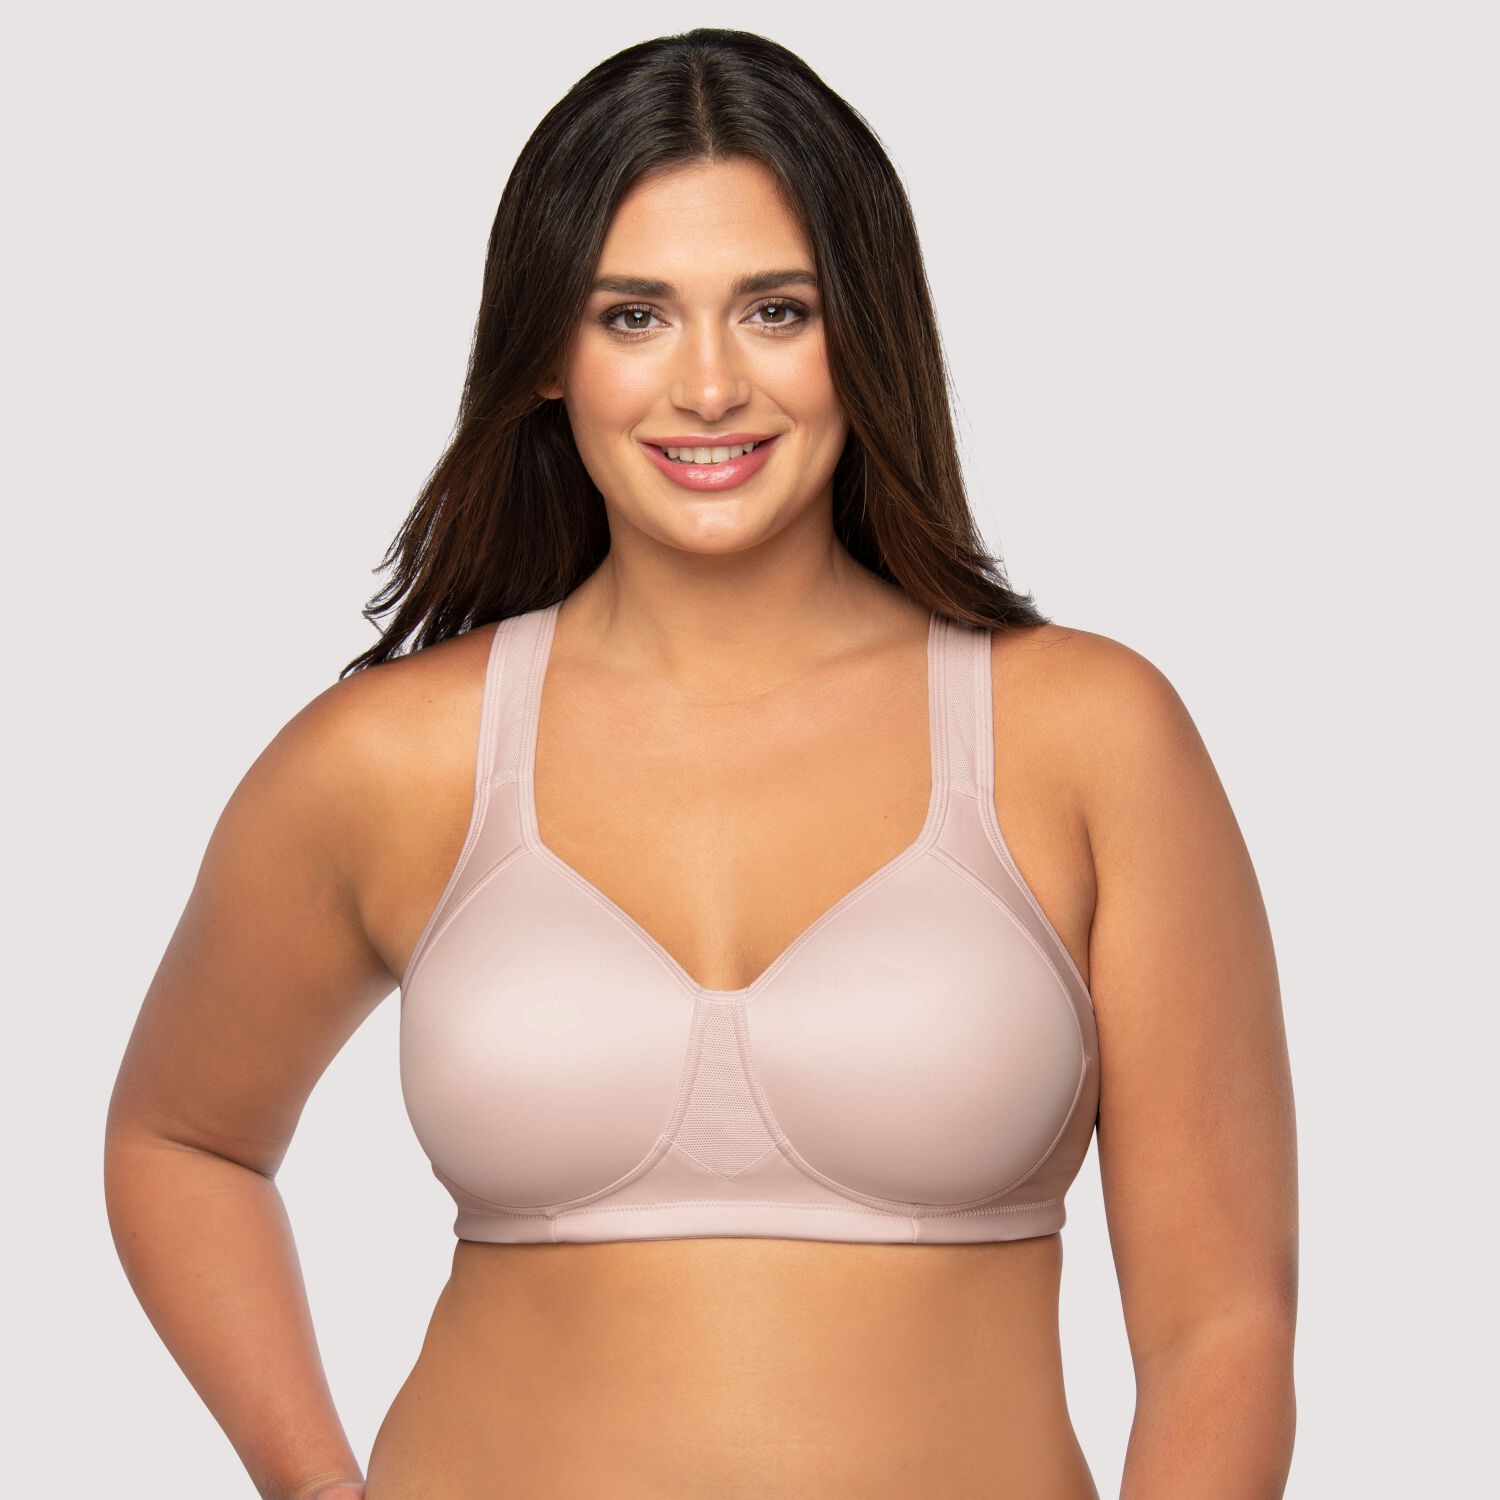 Shop Plus Size 34 46 Bras with great discounts and prices online